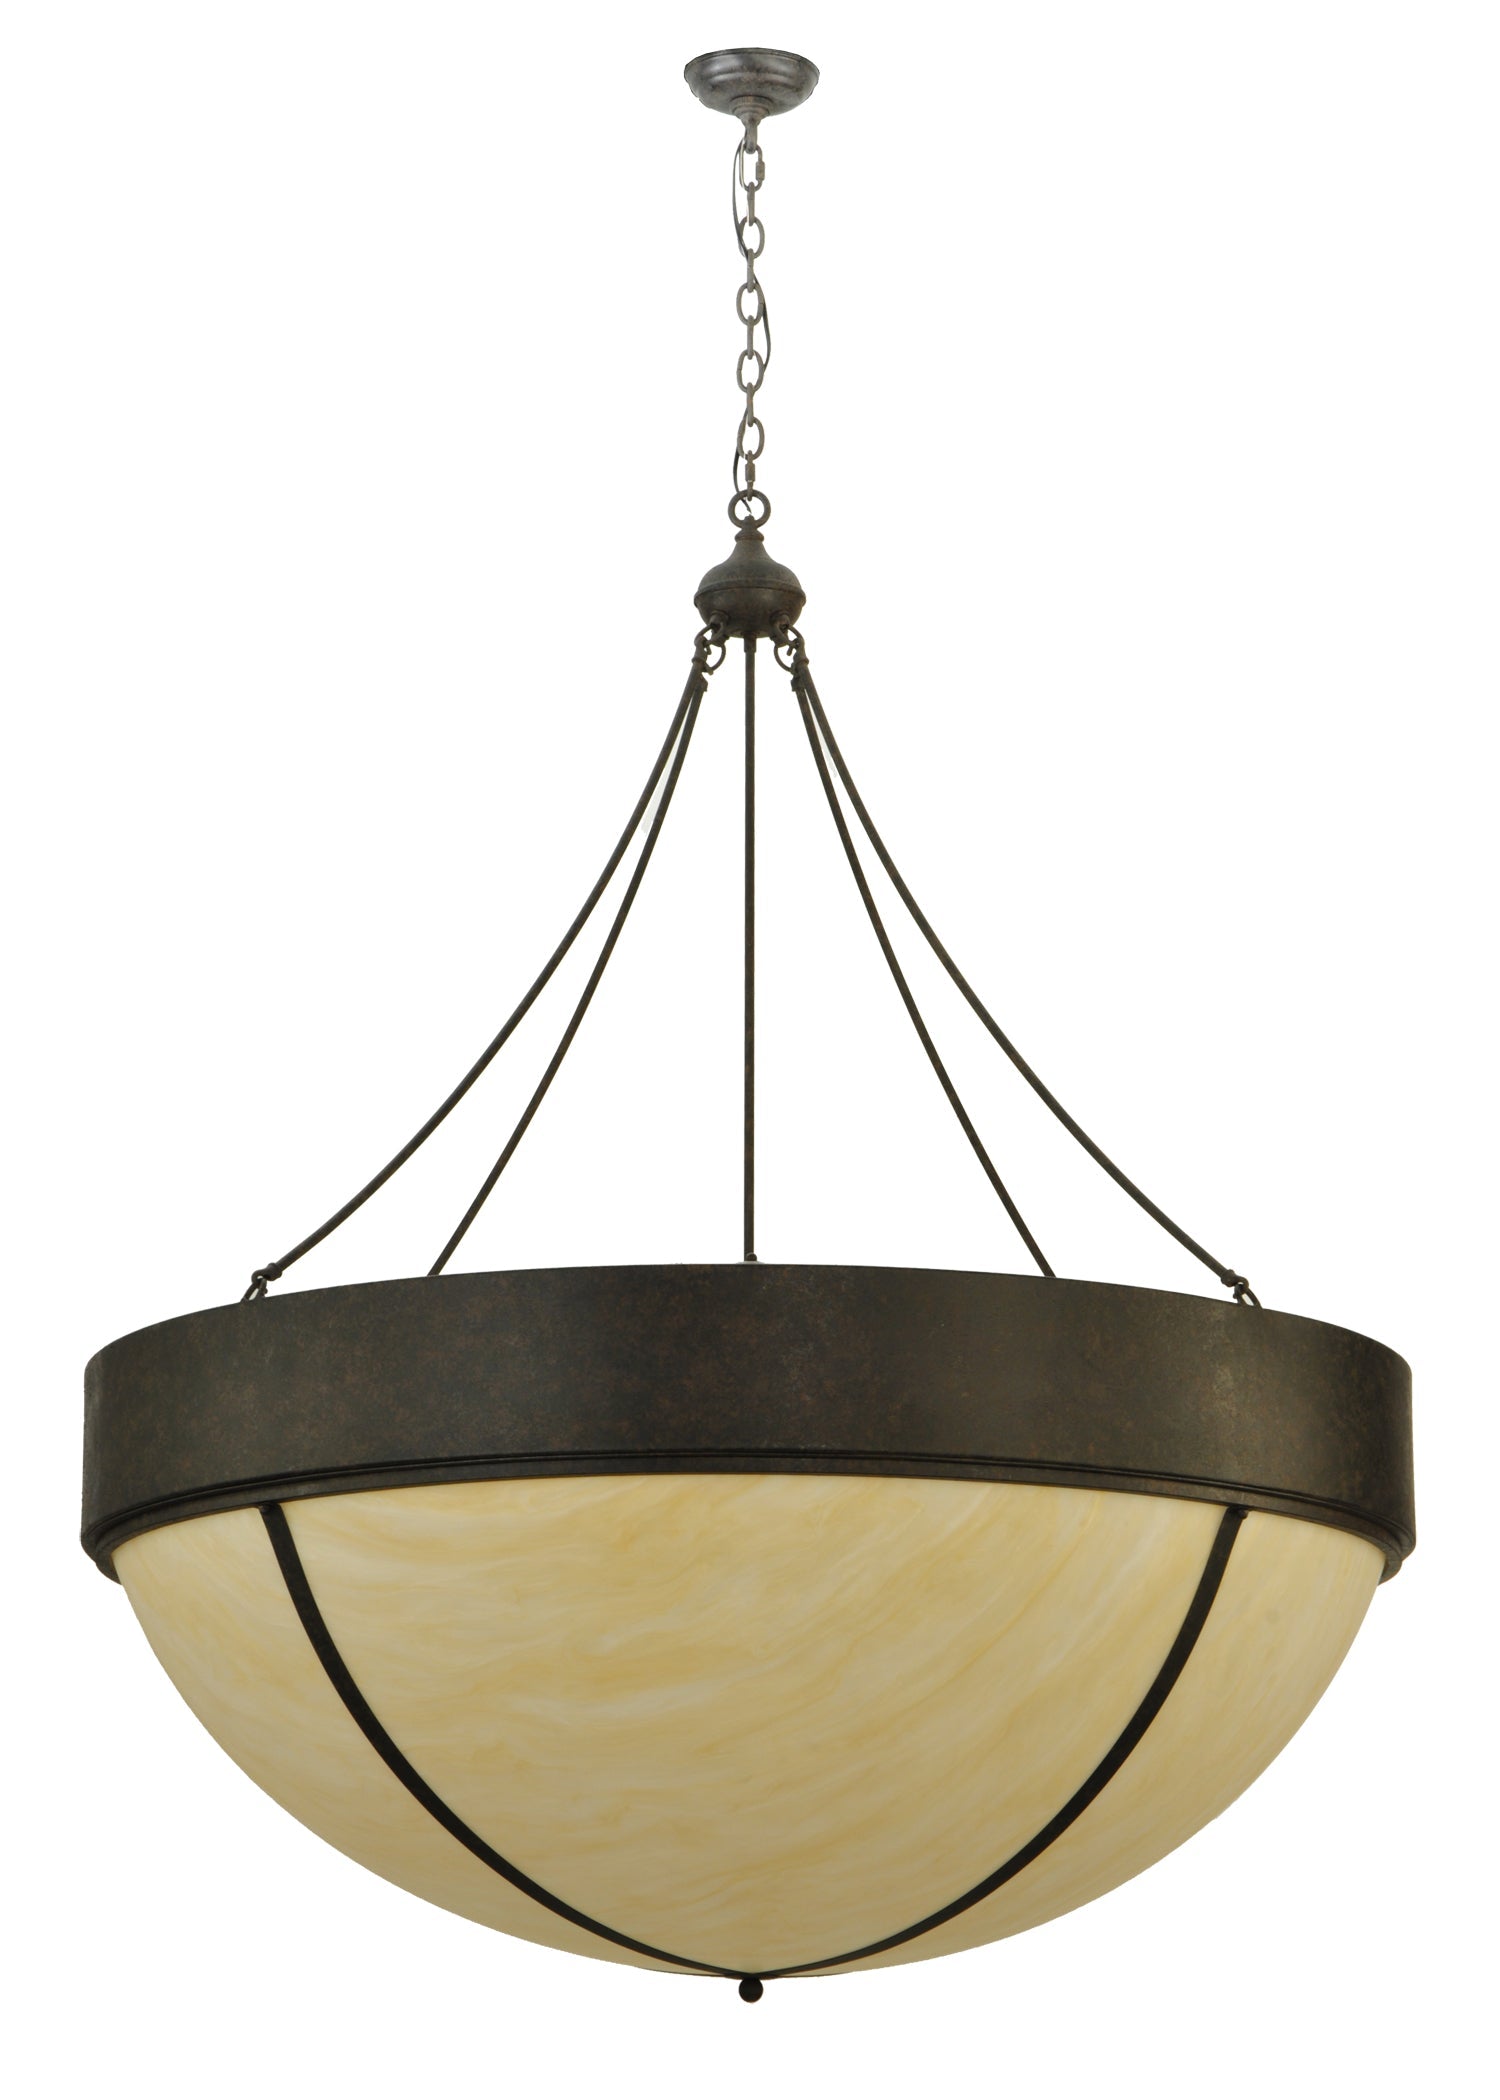 48" Talia Inverted Pendant by 2nd Ave Lighting